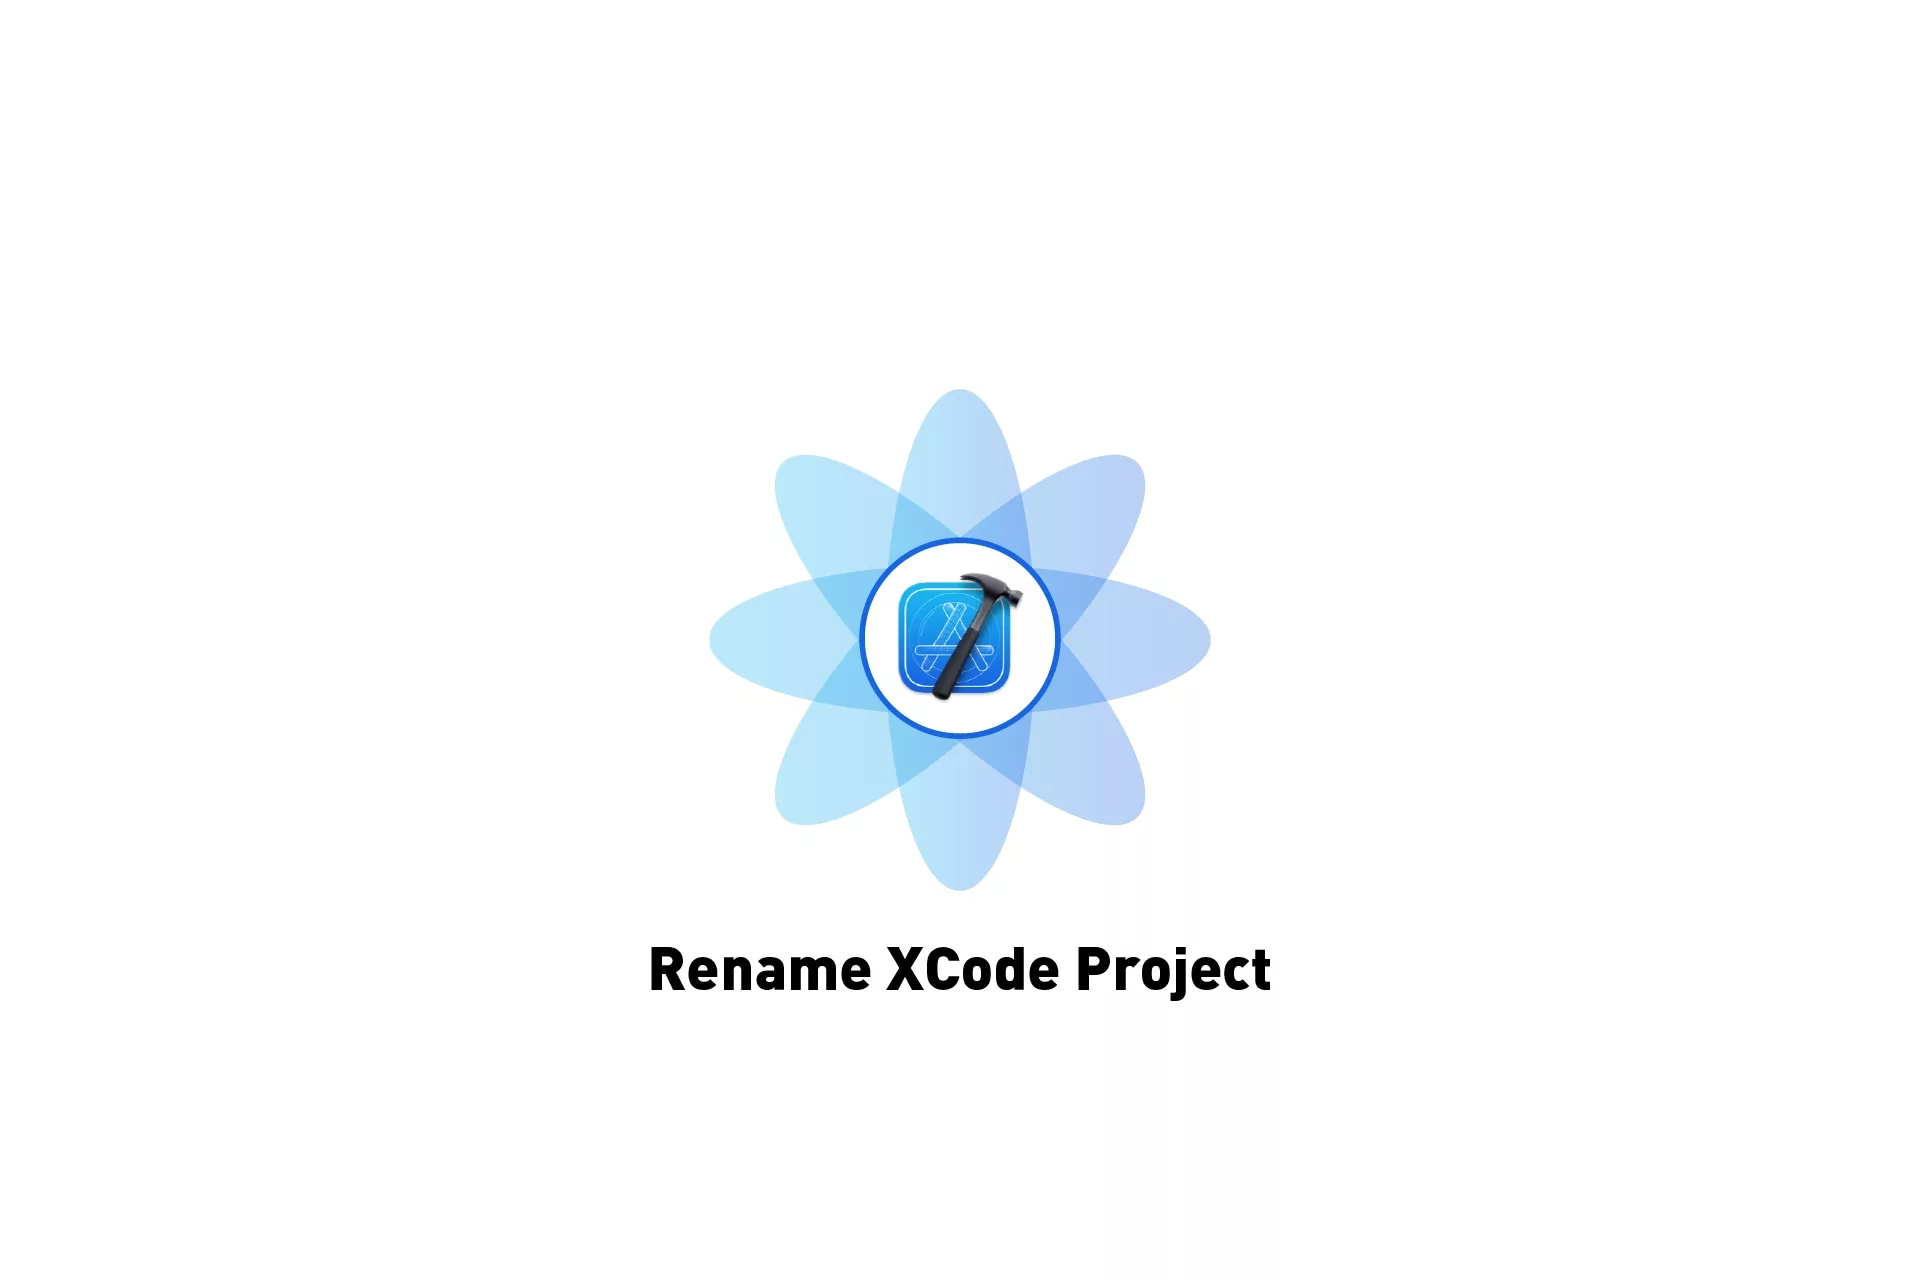 A flower that represents XCode. Beneath it sits the text that states 'Rename XCode Project'.